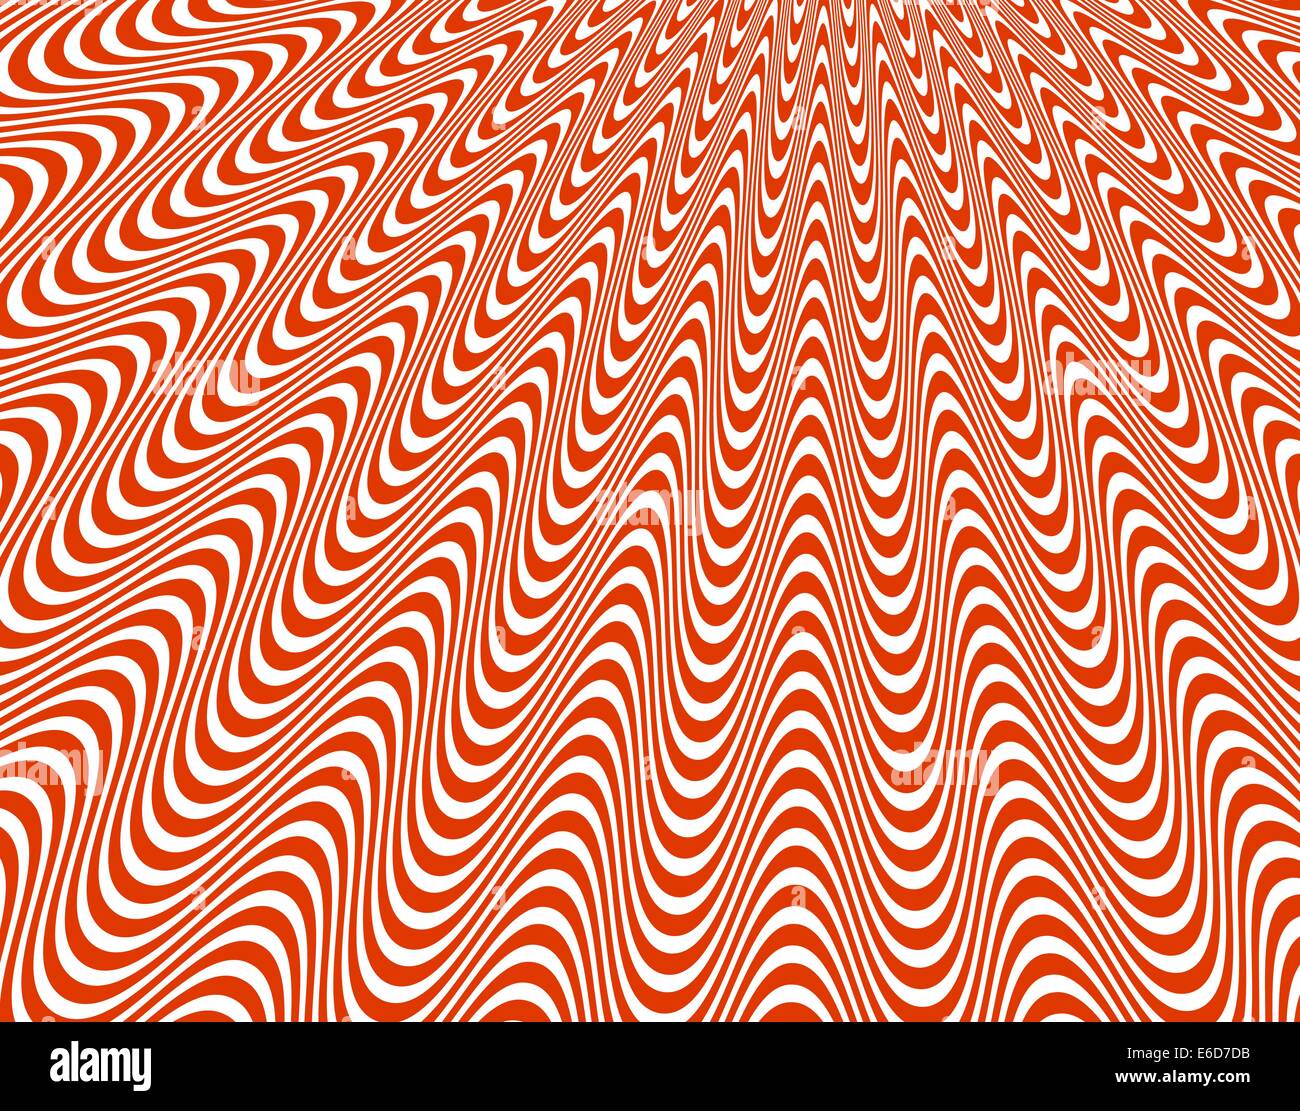 Abstract editable vector background of wavy lines Stock Vector